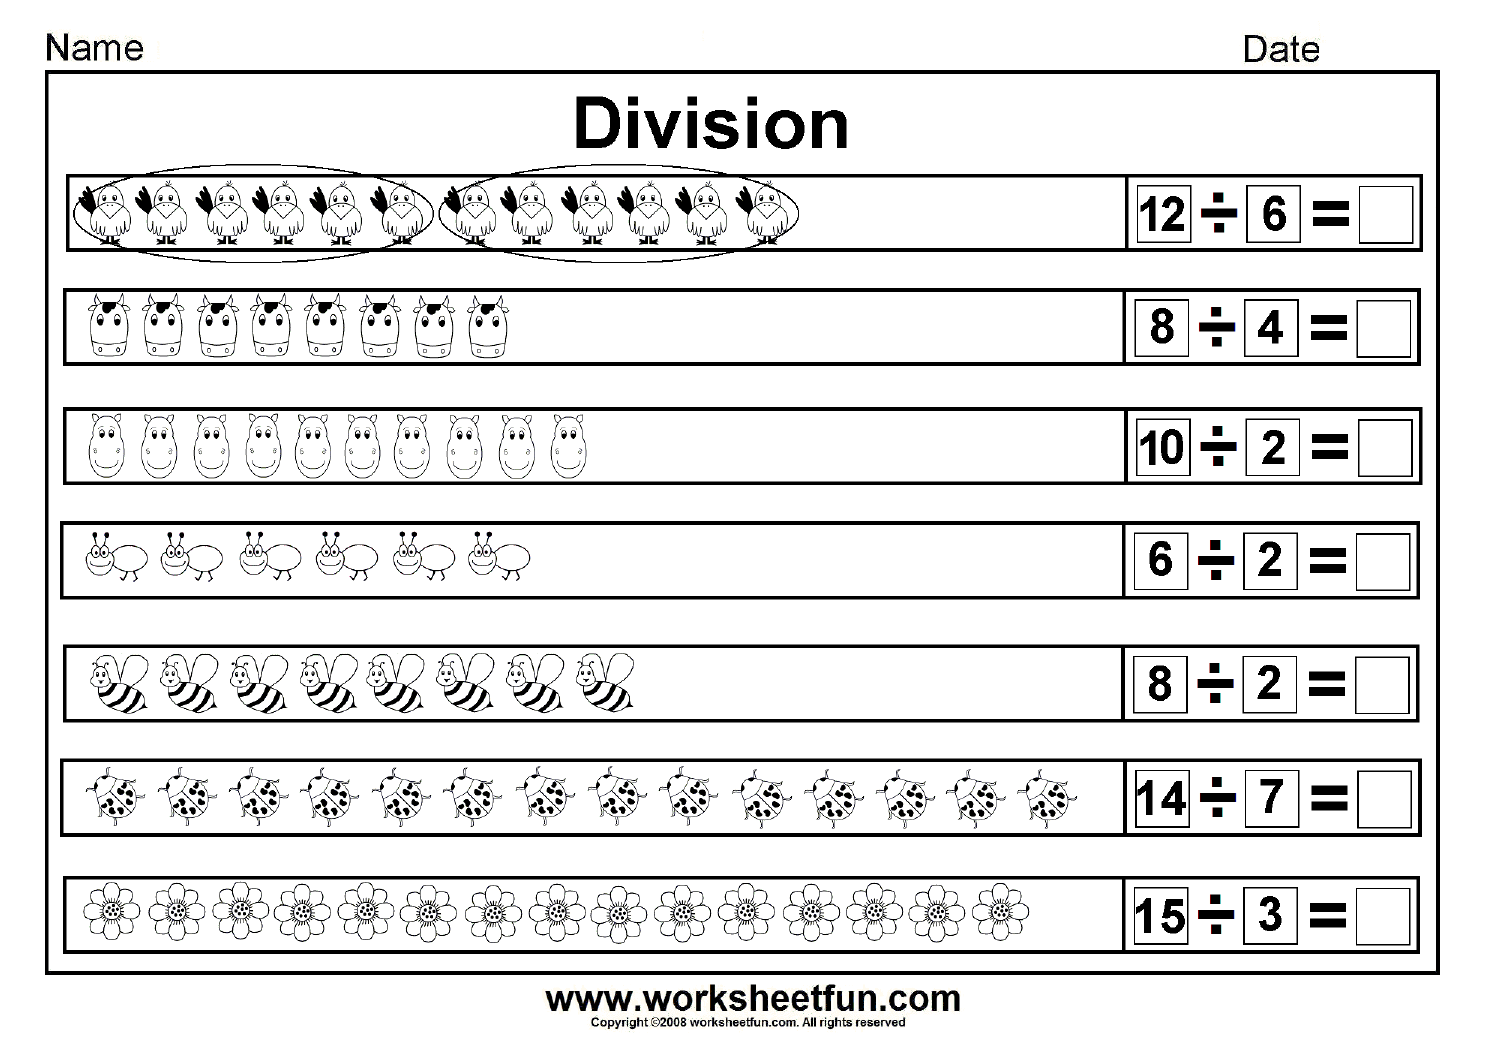 division-sharing-equally-picture-division-14-worksheets-free